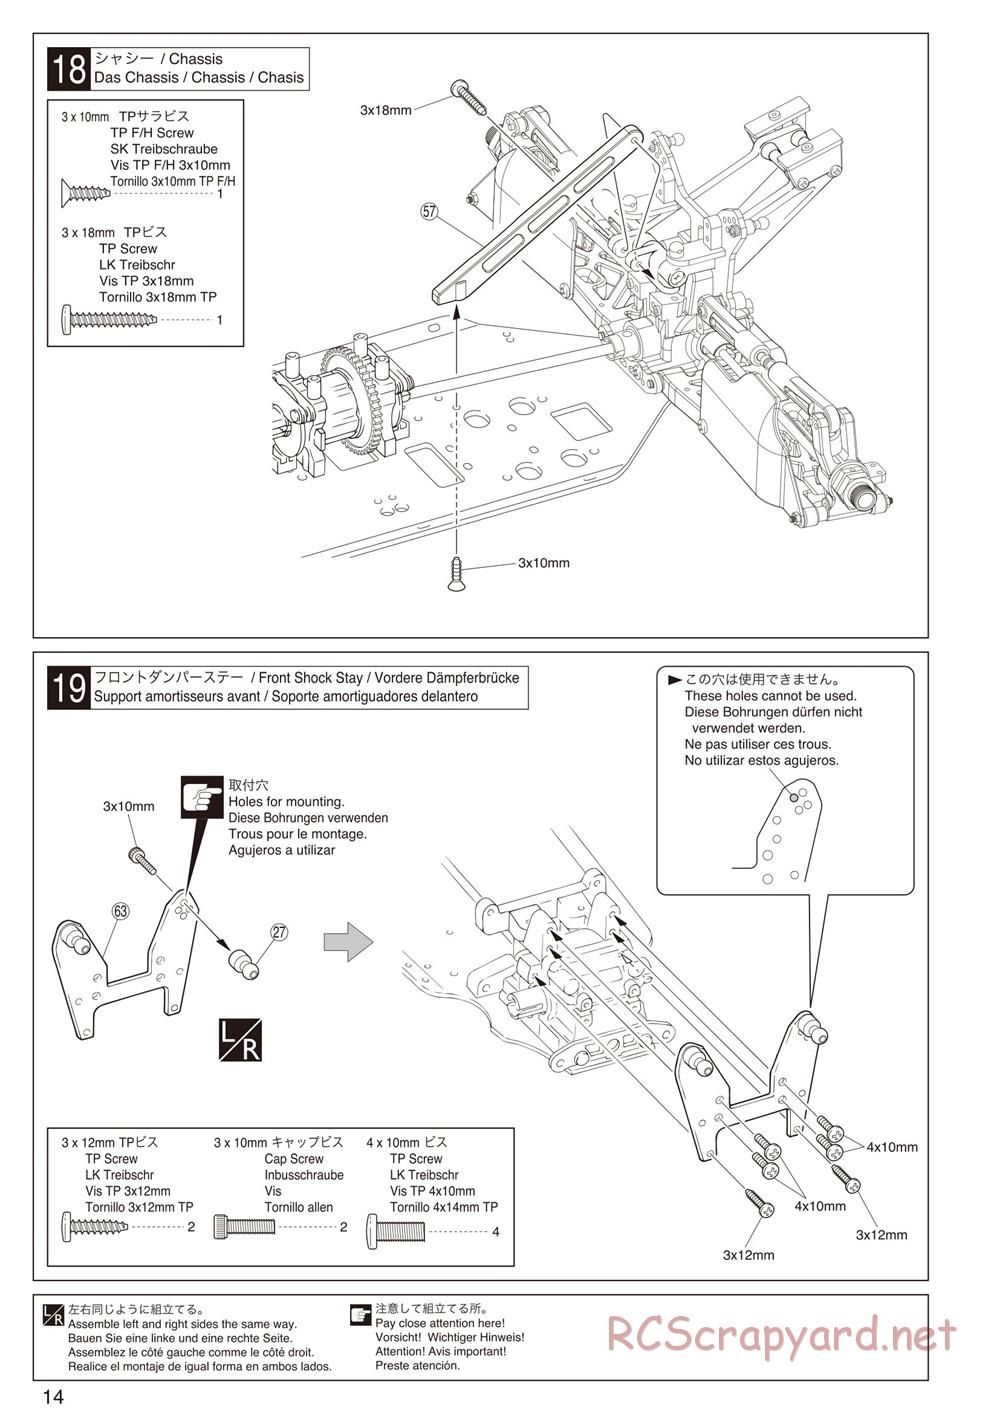 Kyosho - Inferno Neo ST - Manual - Page 14